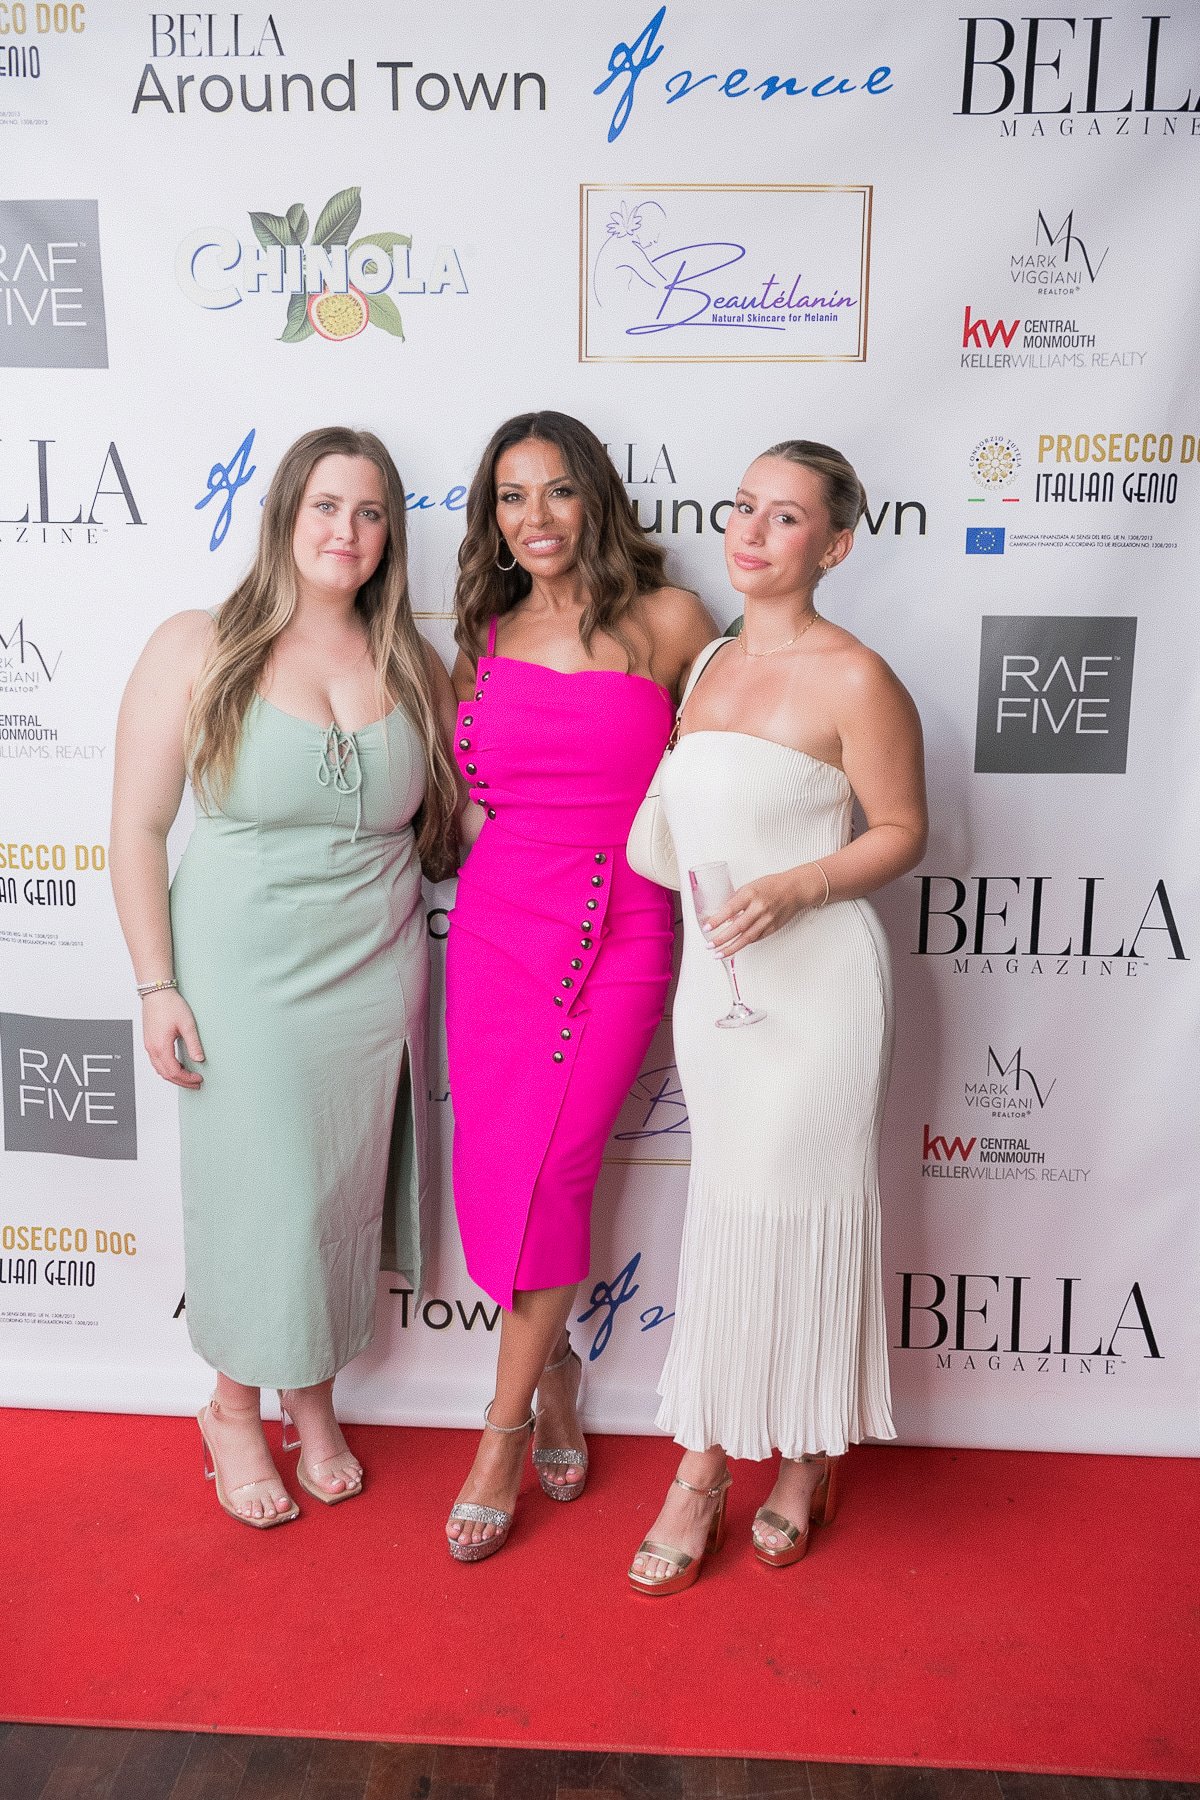 BELLA-MAGAZINE-Summer-Issue-Cover-Party-Avenue-Long-Branch-240.jpg